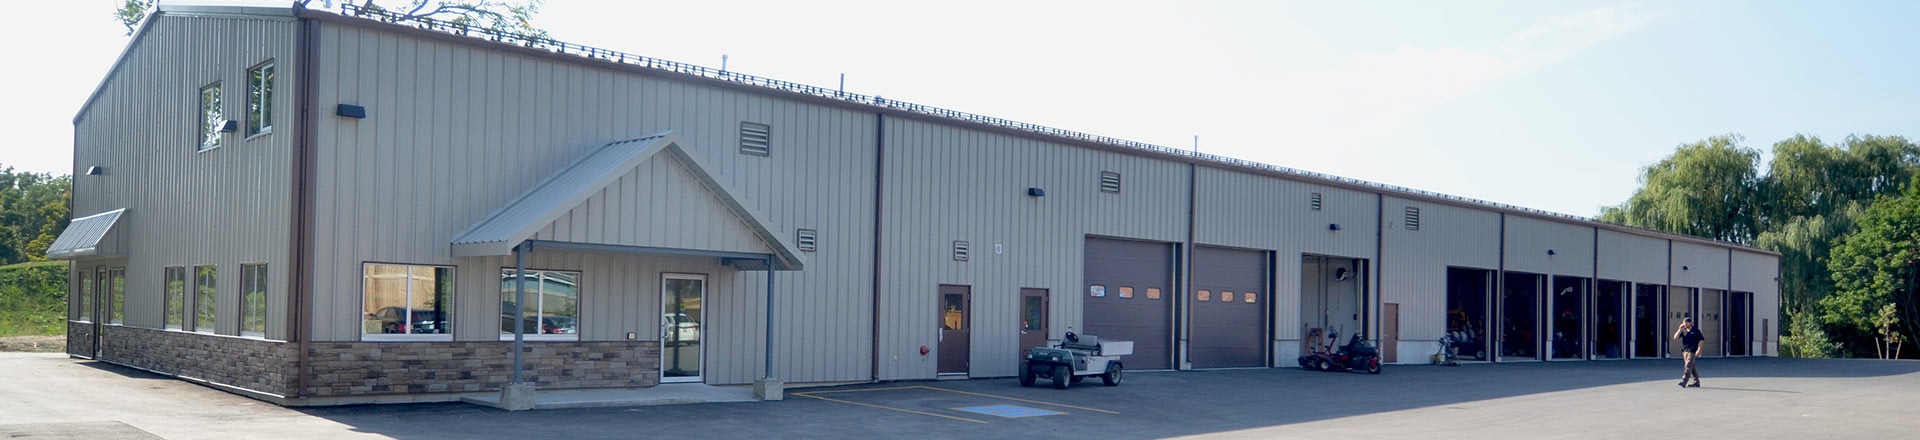 commercial steel building project